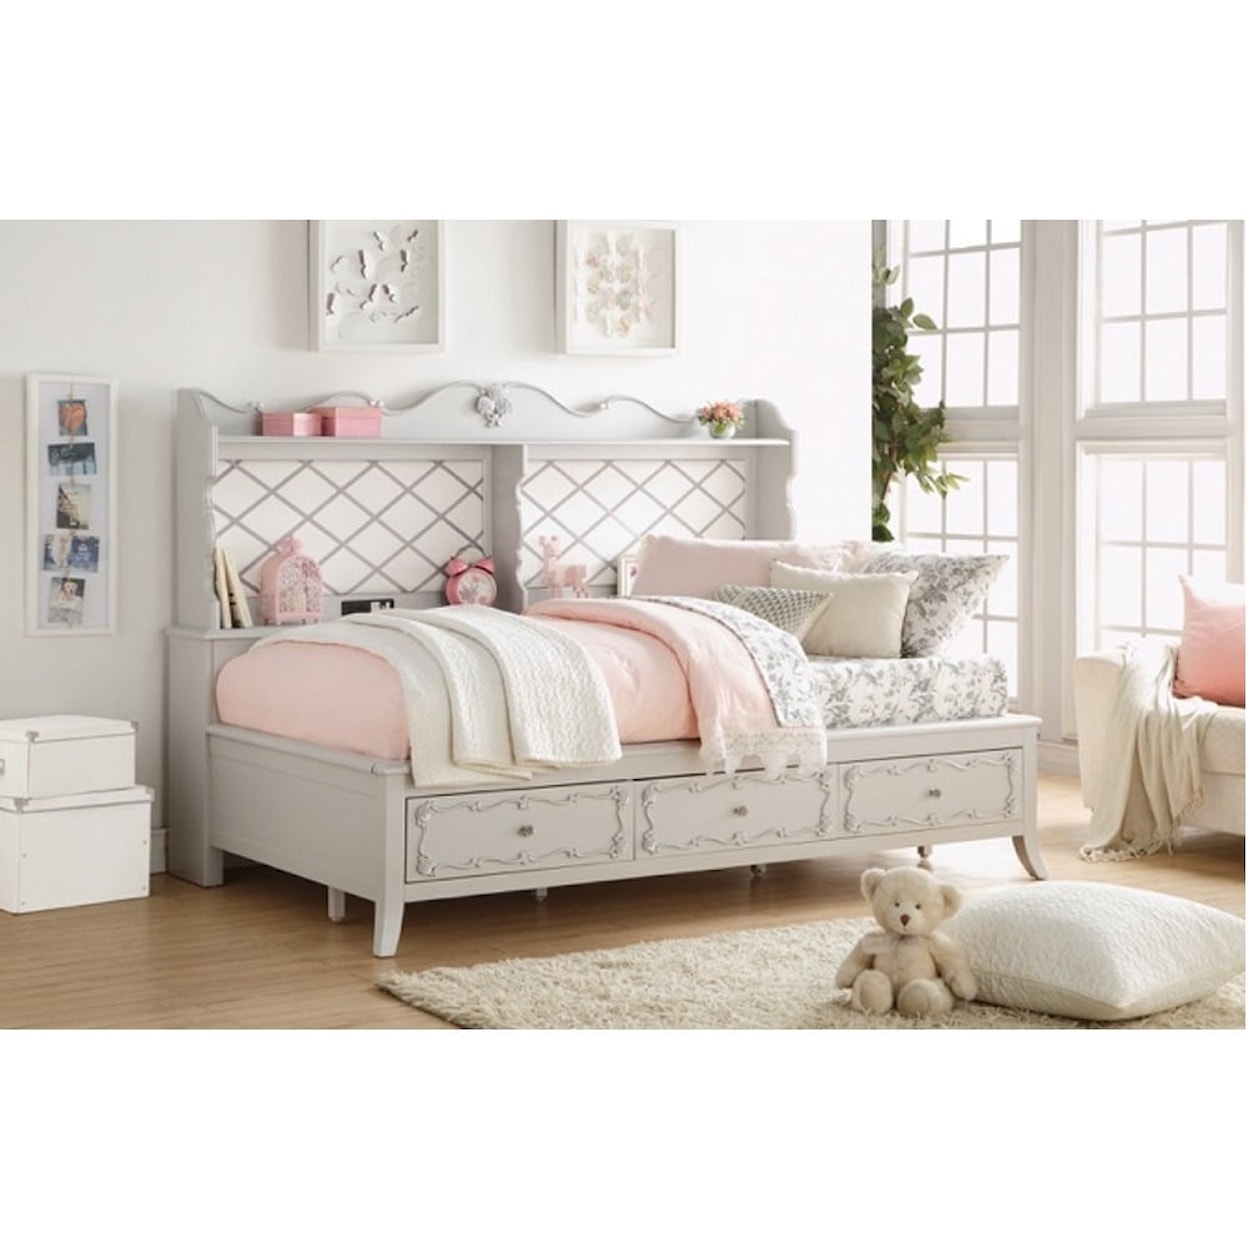 Acme Furniture Edalene Daybed (Twin)